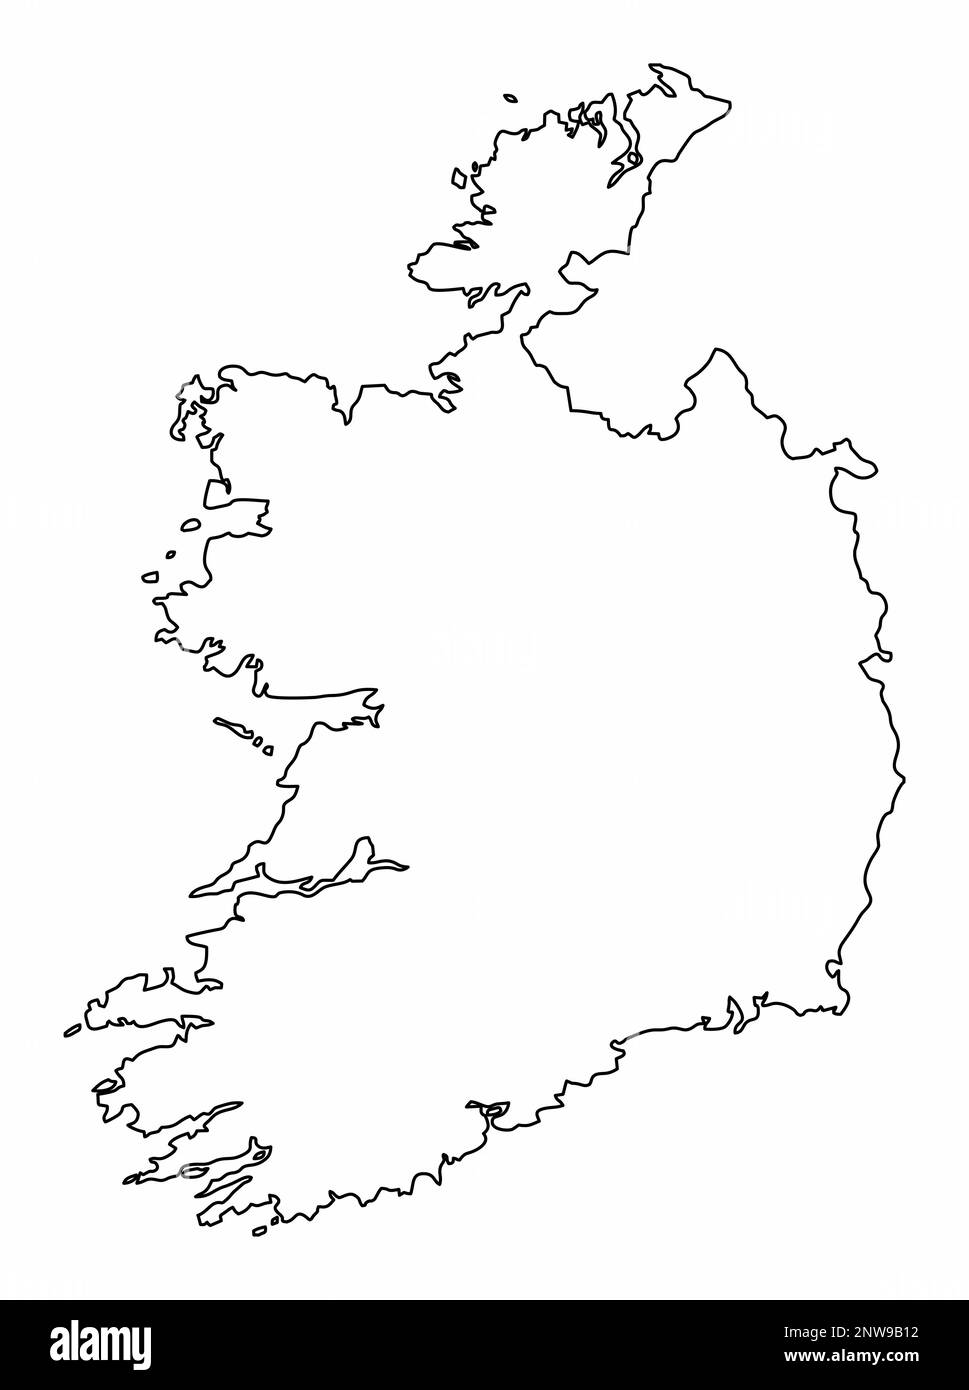 Ireland outline map isolated on white background Stock Vector